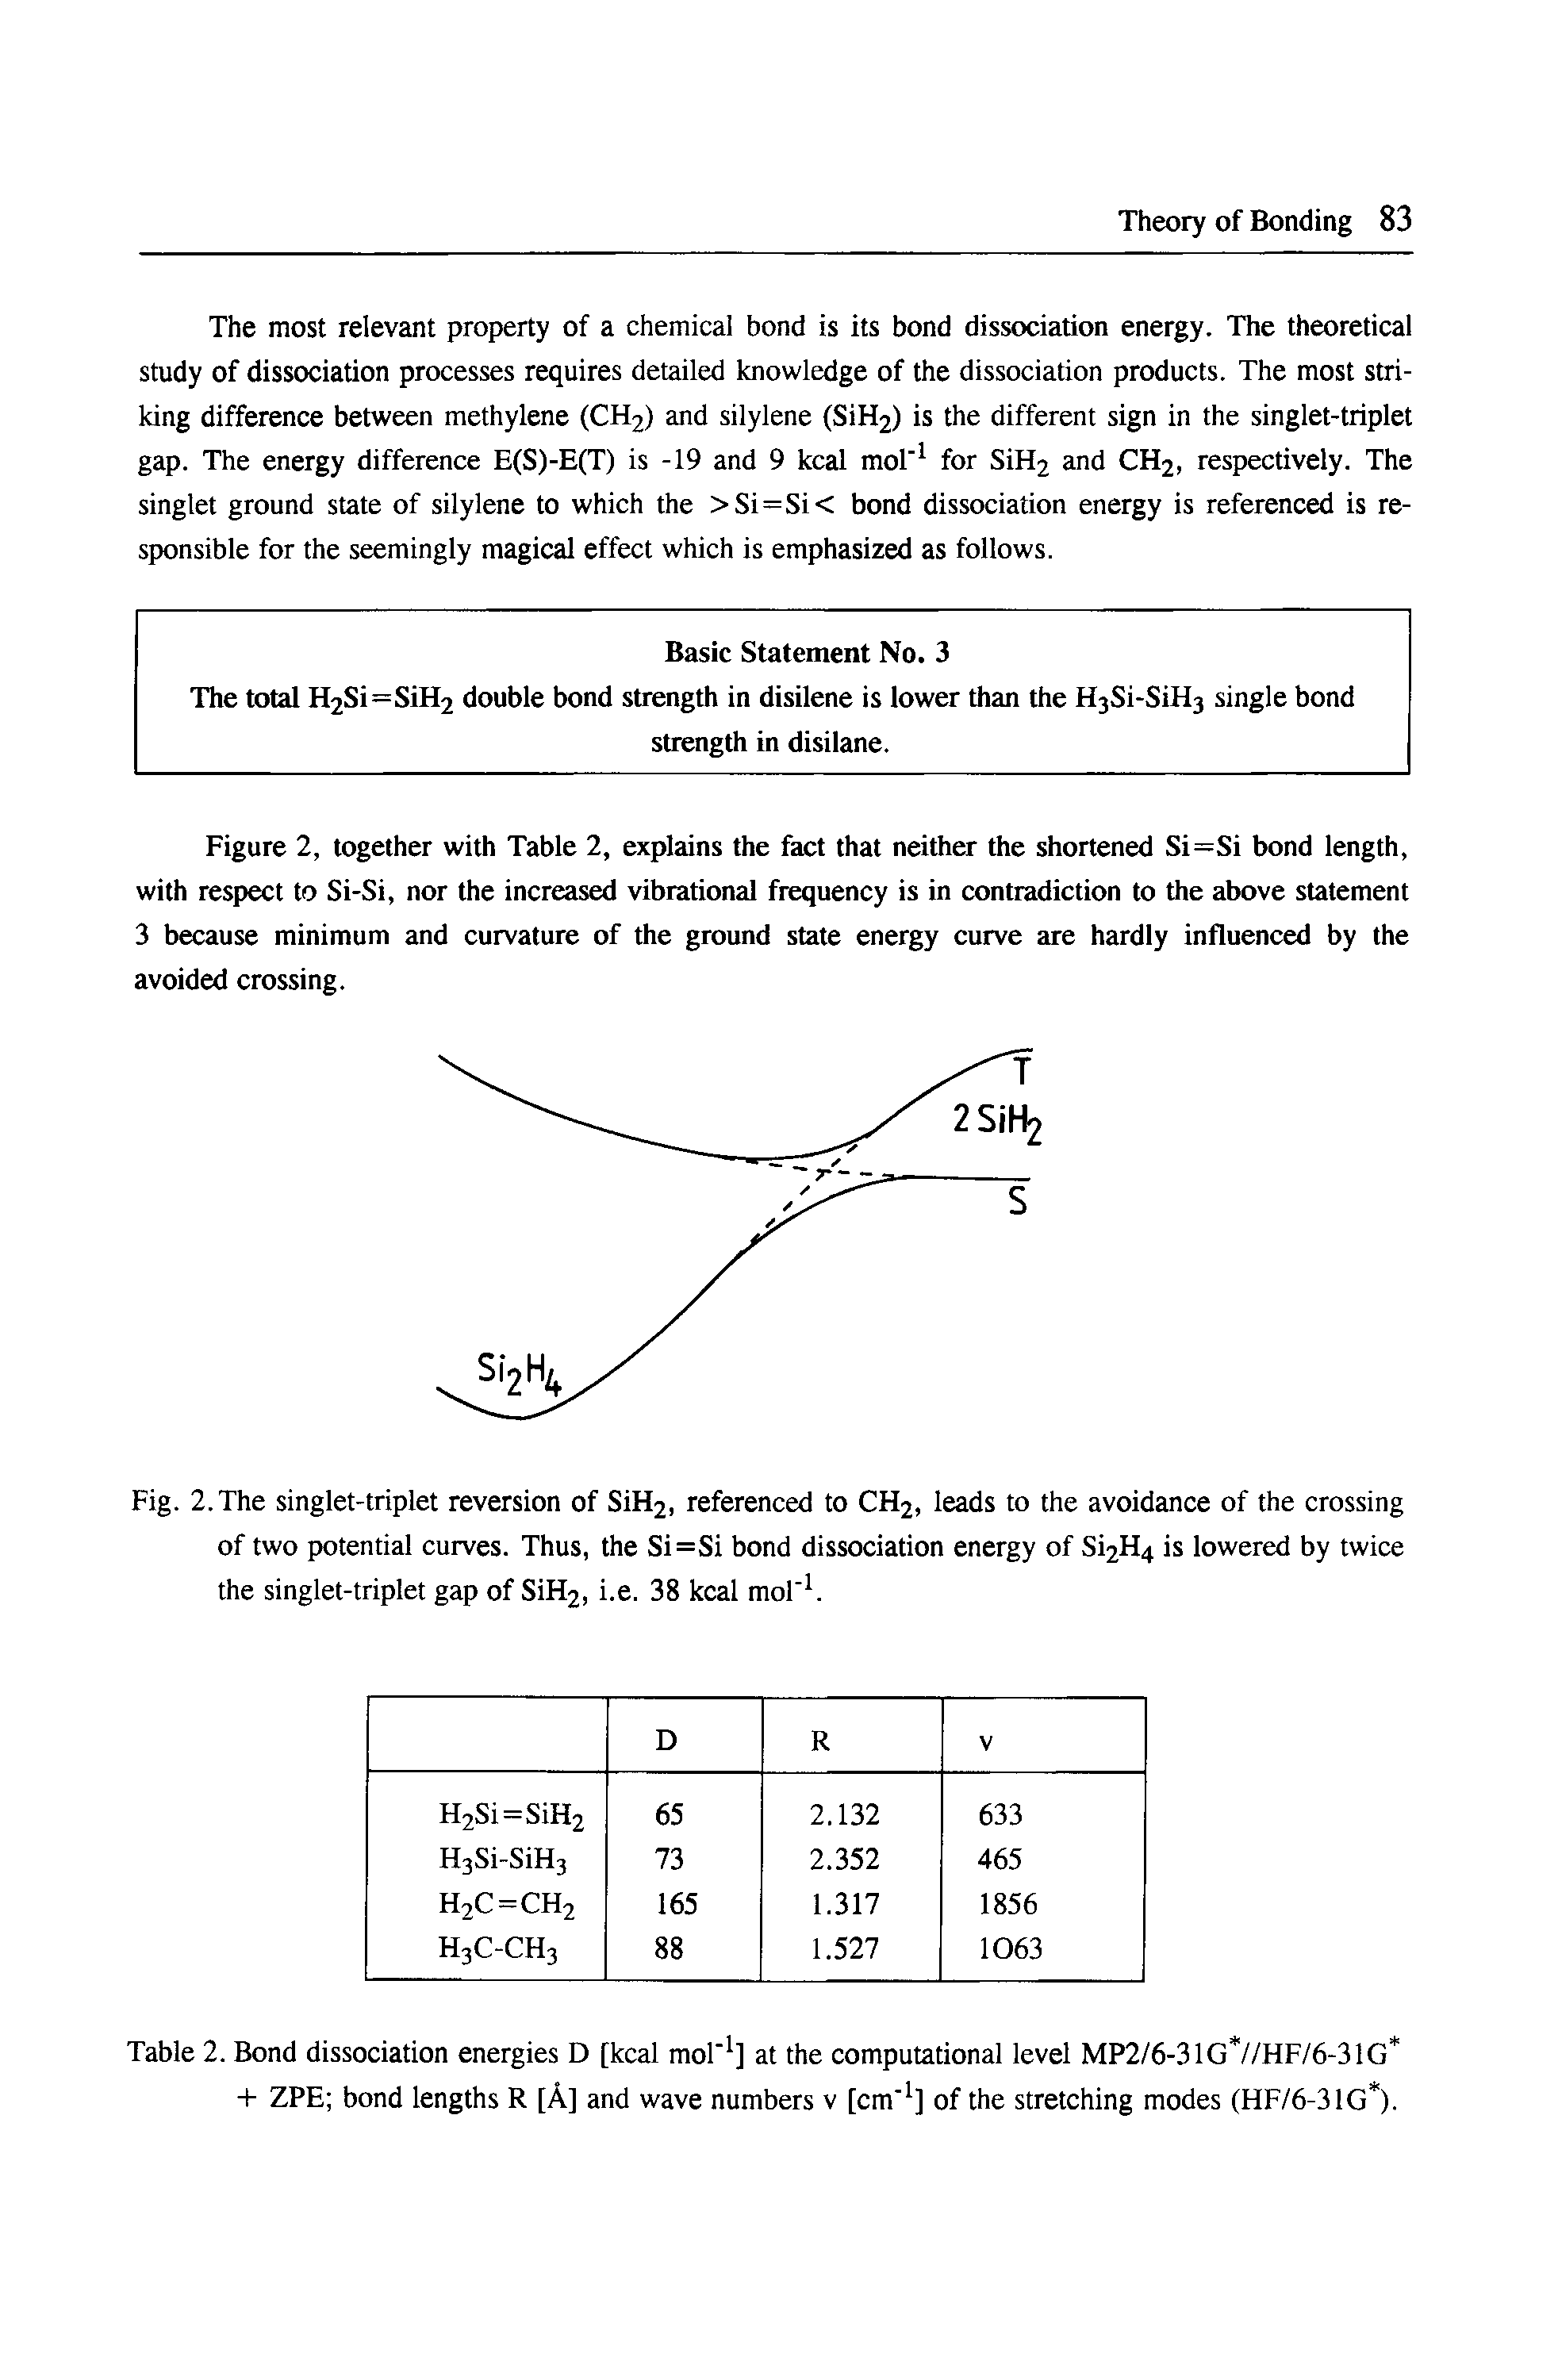 Table 2. Bond dissociation energies D [kcal mol 1] at the computational level MP2/6-31G //HF/6-31G + ZPE bond lengths R [A] and wave numbers v [cm 1] of the stretching modes (HF/6-31G ).